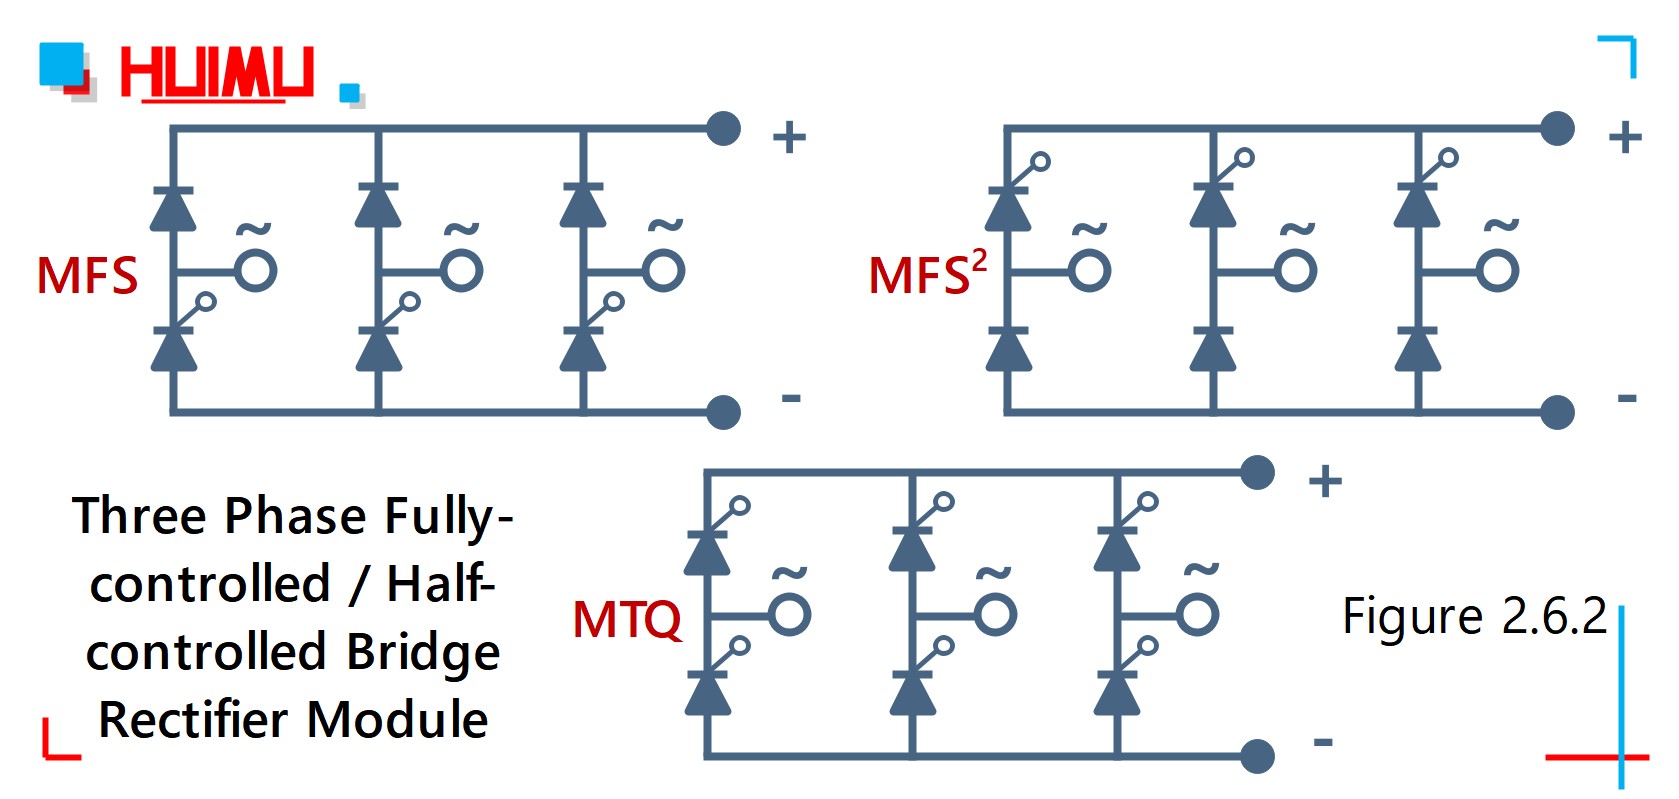 Wiring diagram of three phase fully-controlled / half-controlled bridge rectifier module